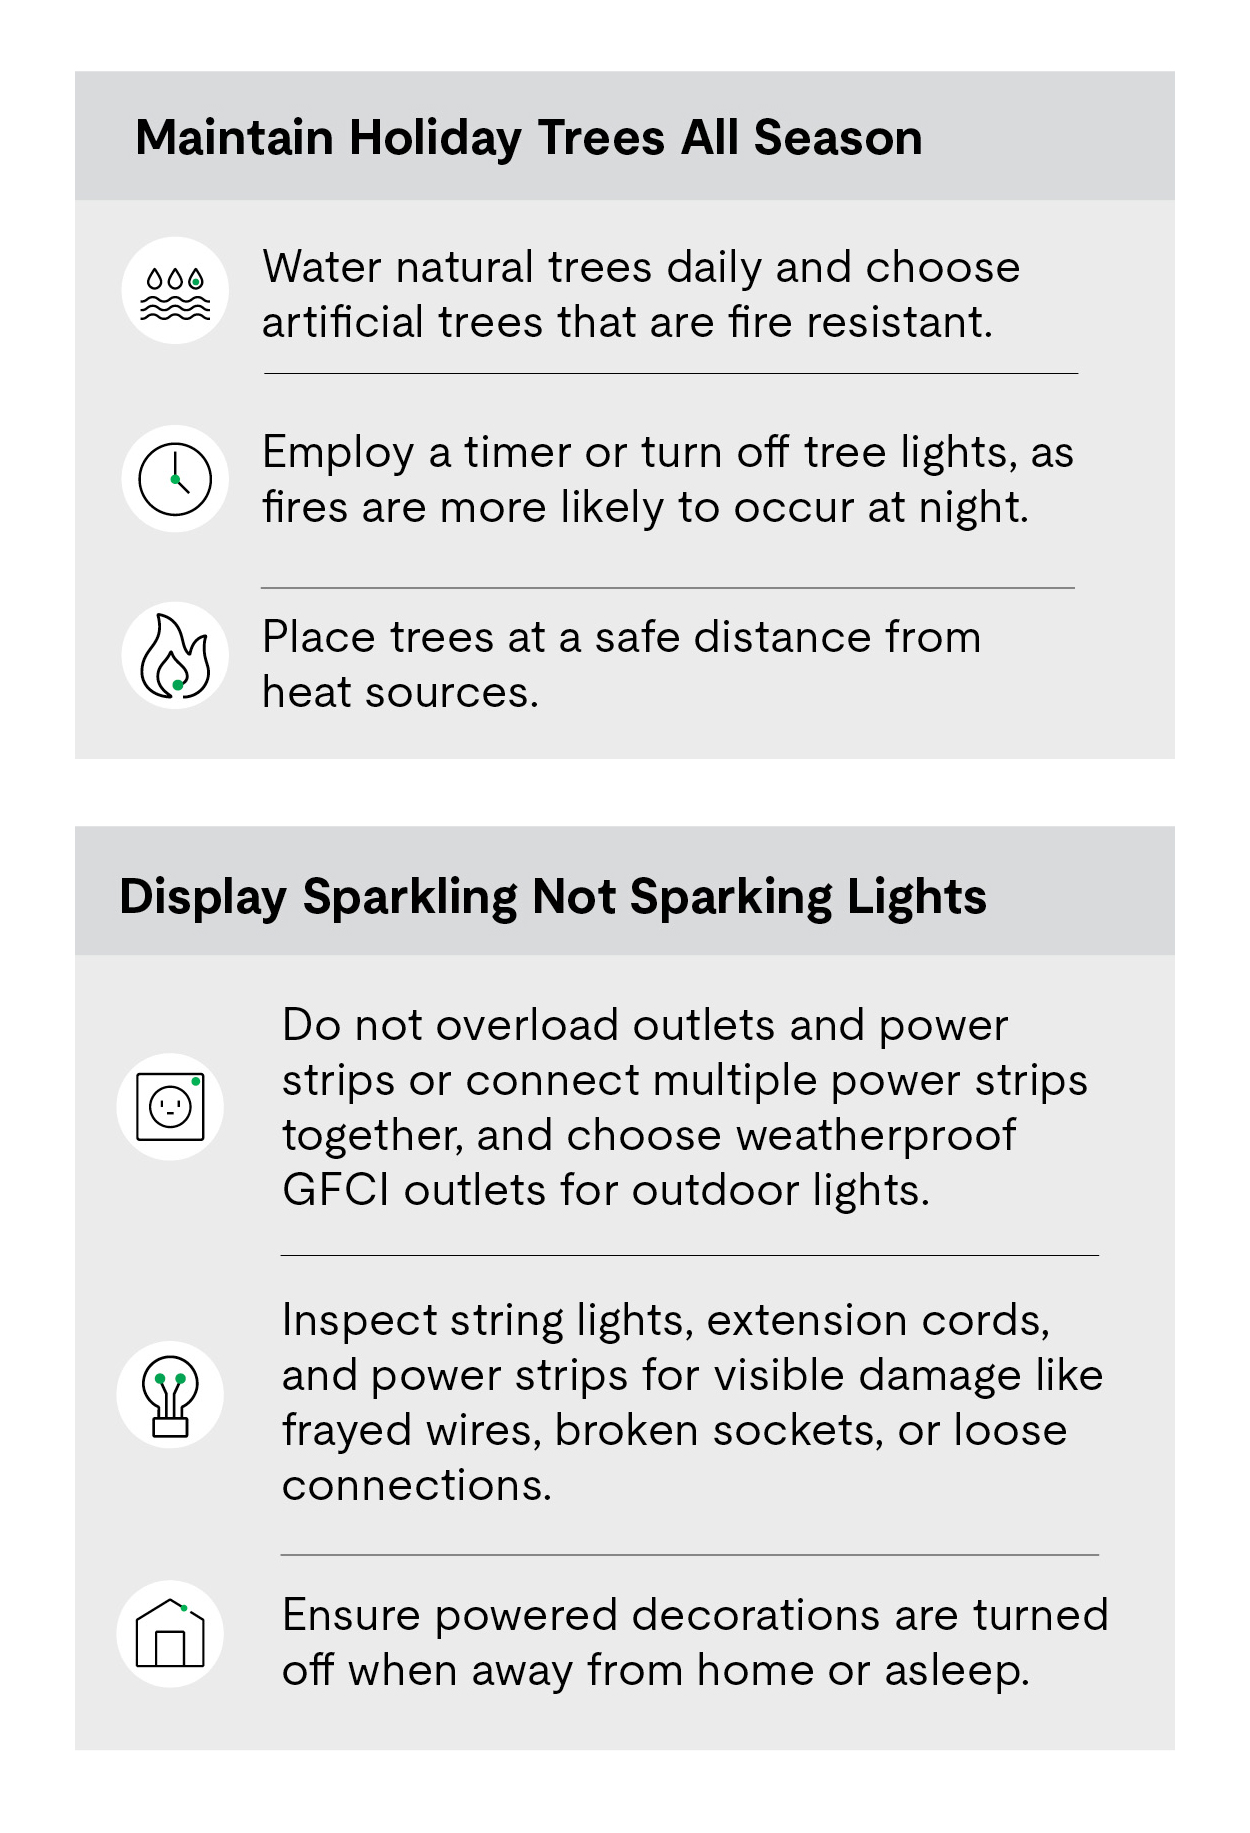 List of Holiday Decorating Safety Tips